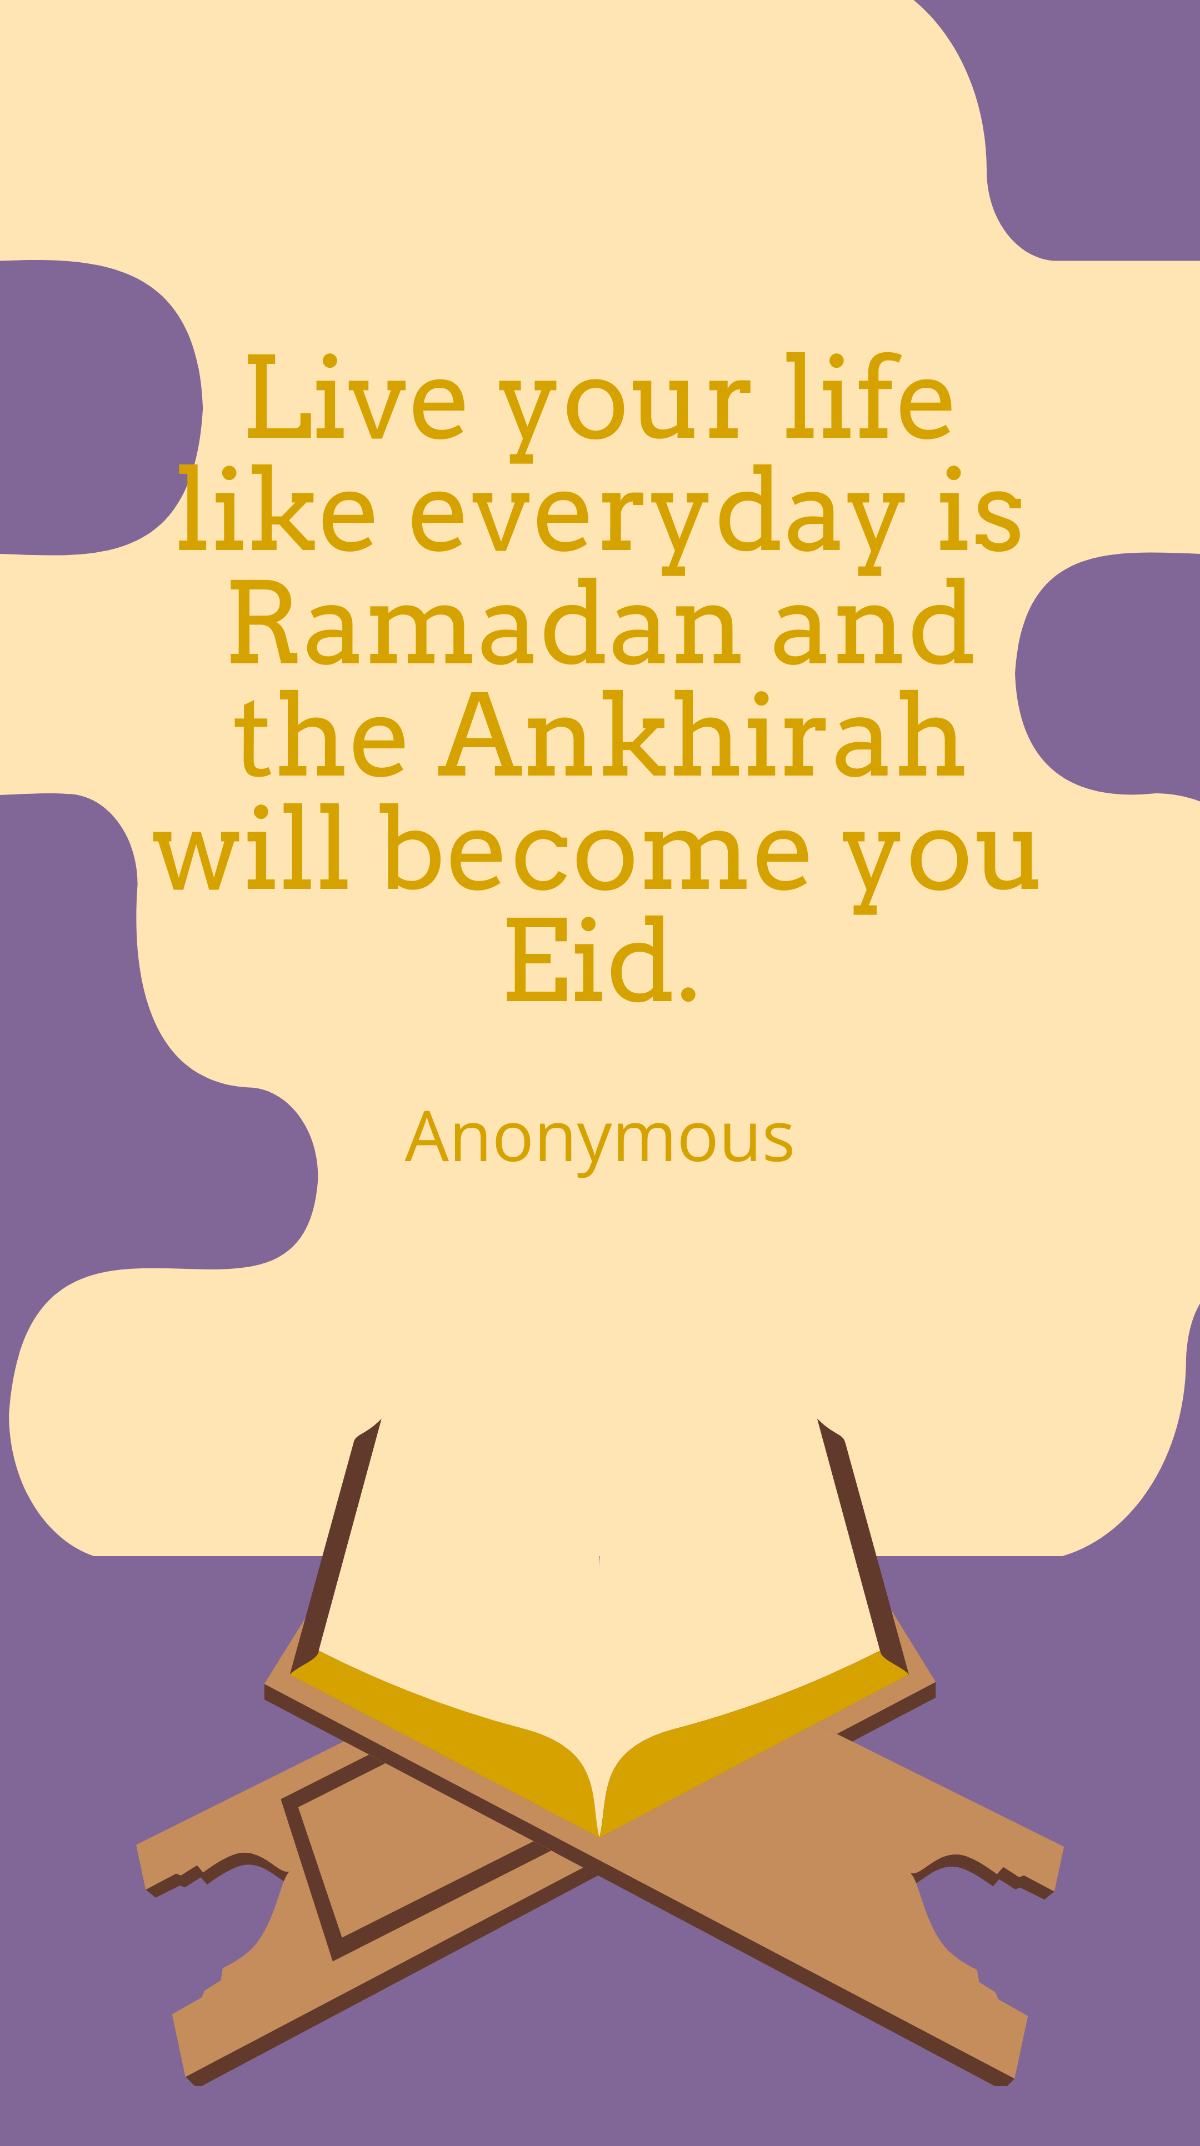 Anonymous - Live your life like everyday is Ramadan and the Ankhirah will become you Eid. Template